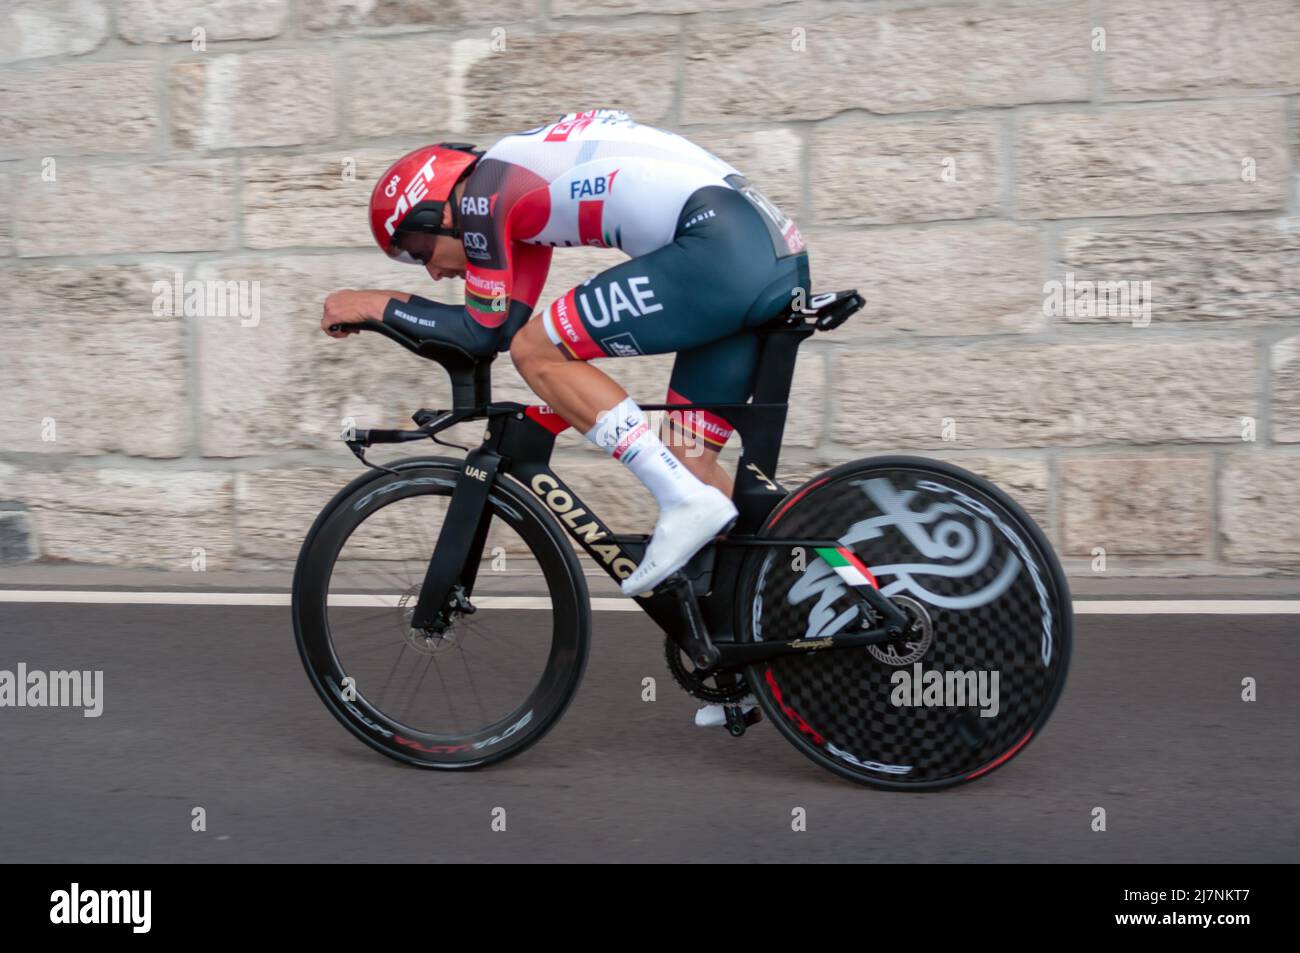 BUDAPEST, HUNGARY - MAY 07, 2022: Pro cyclist Rui Costa UAE TEAM EMIRATES, Giro D'Italia Stage 2 Time trial - cycling competition on May 07, 2022 in B Stock Photo